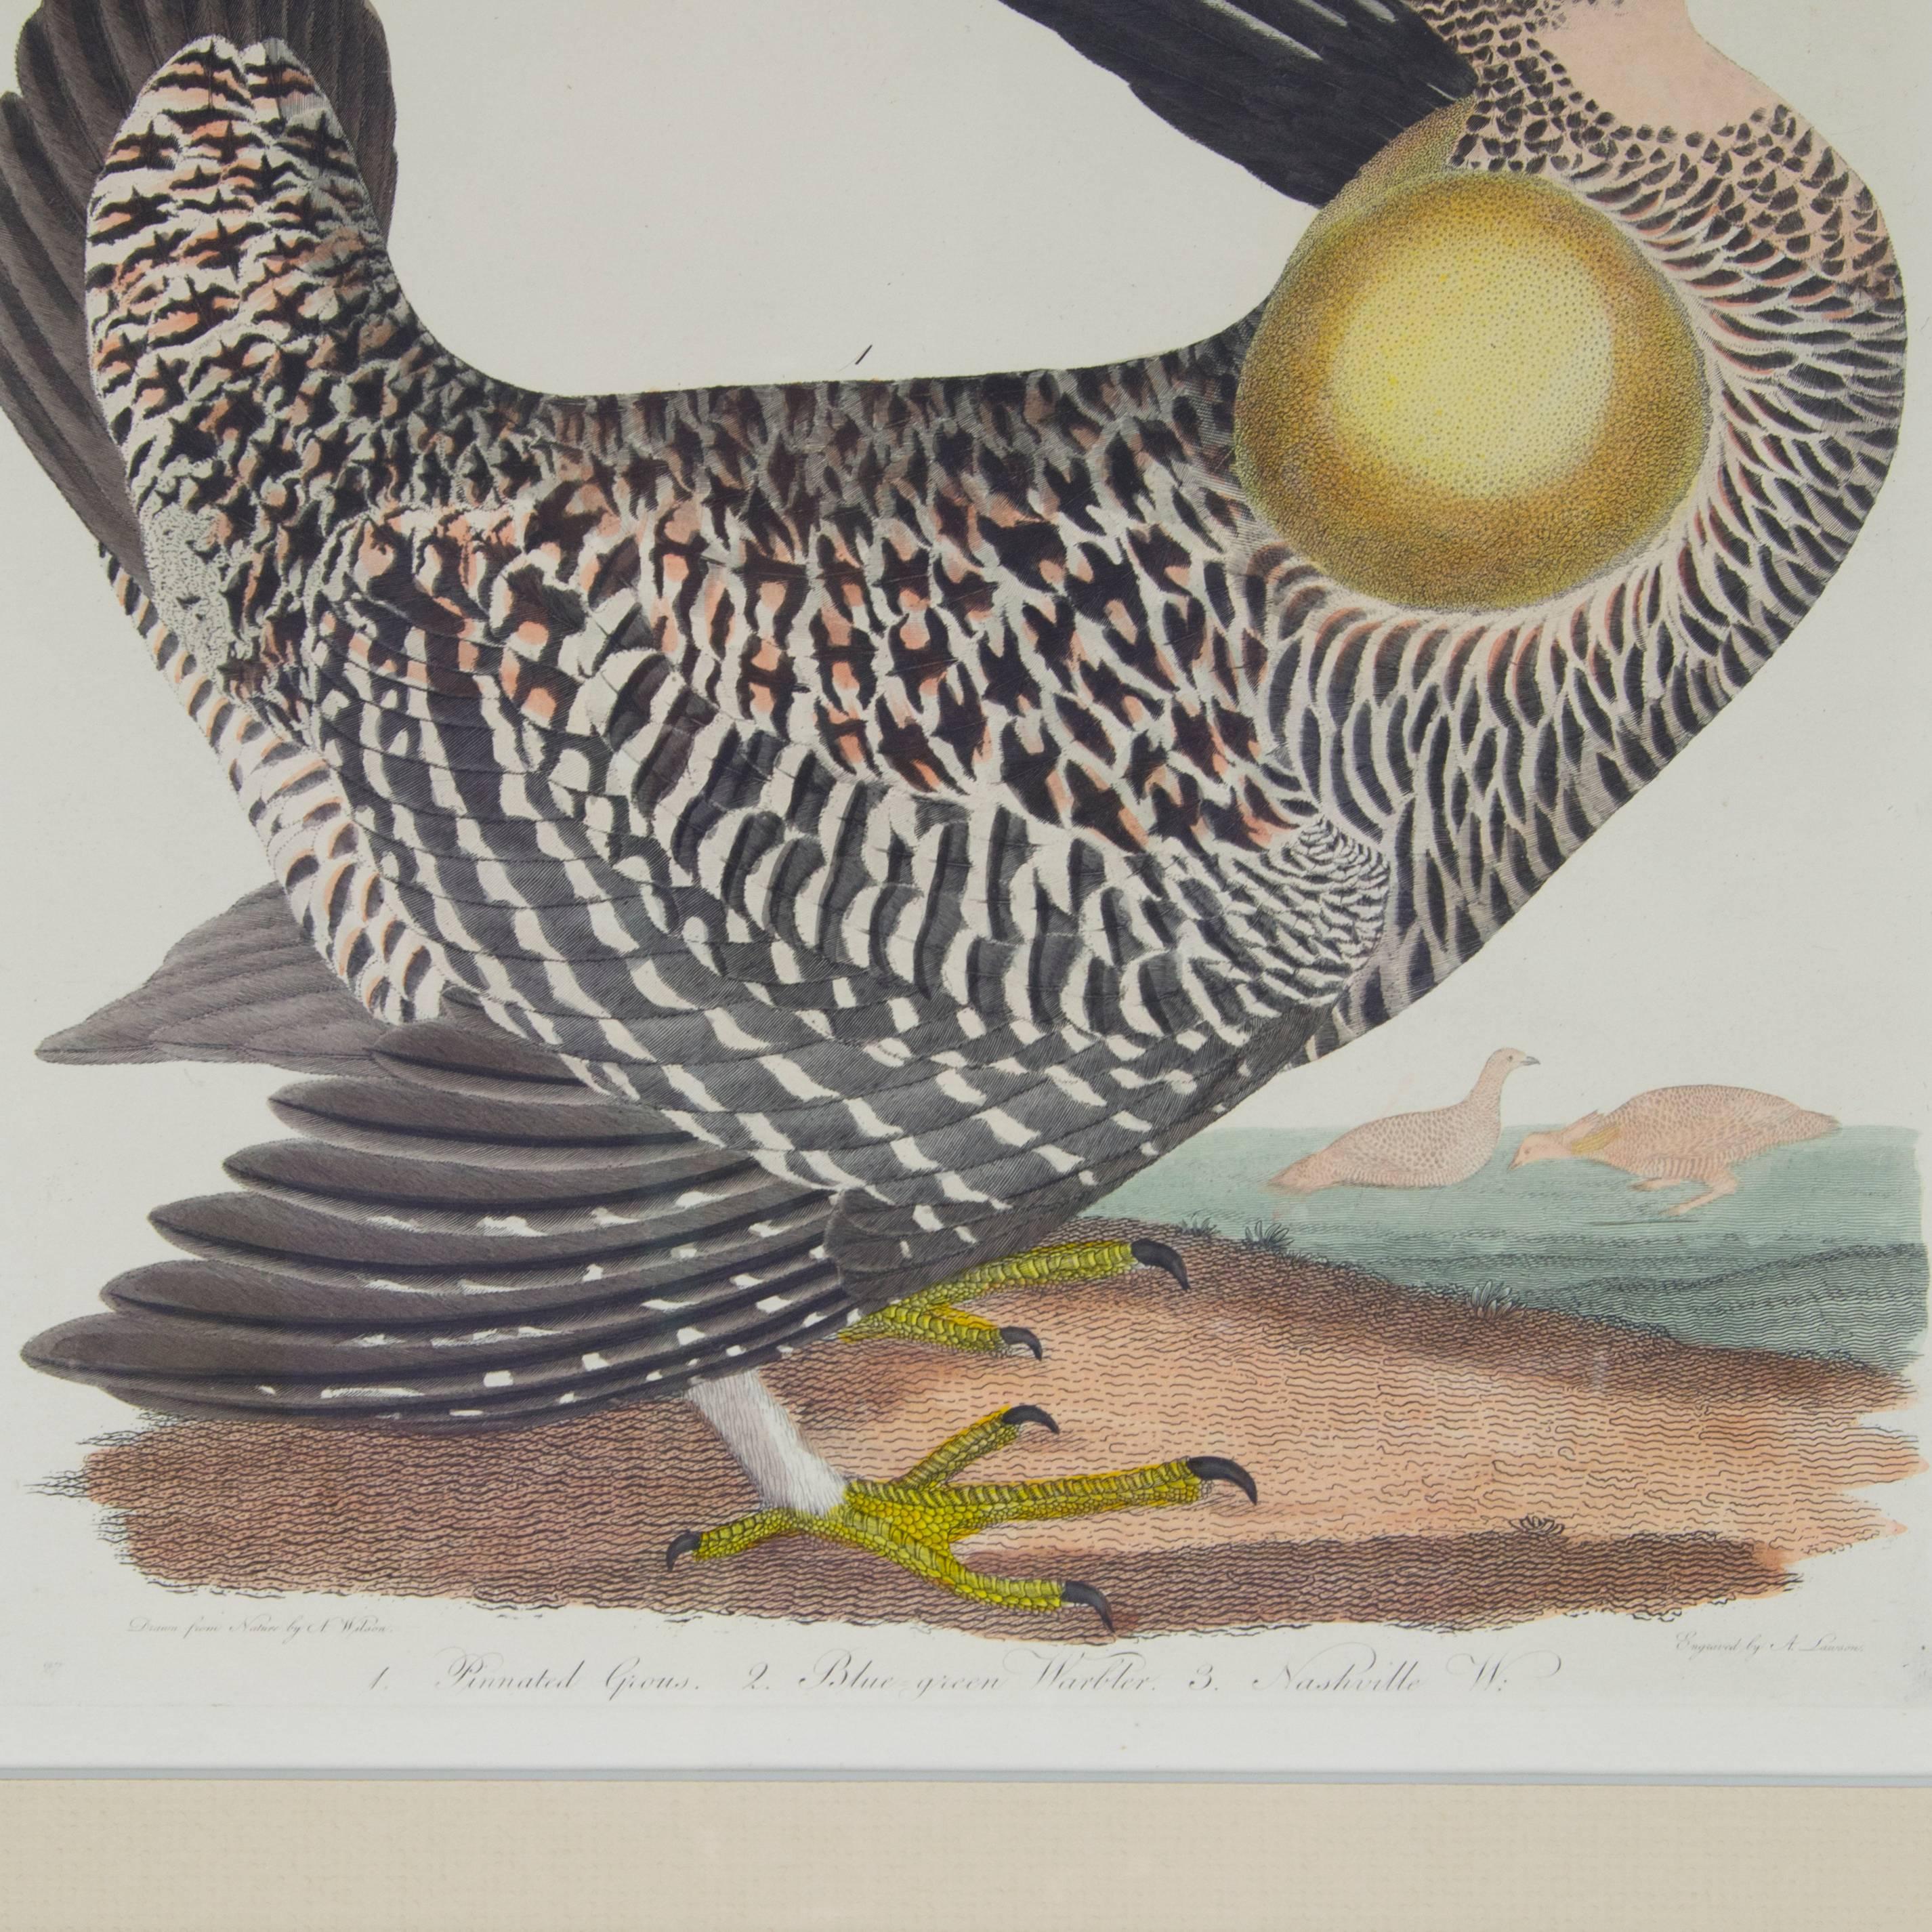 Hand-colored engraving from Alexander Wilson's 